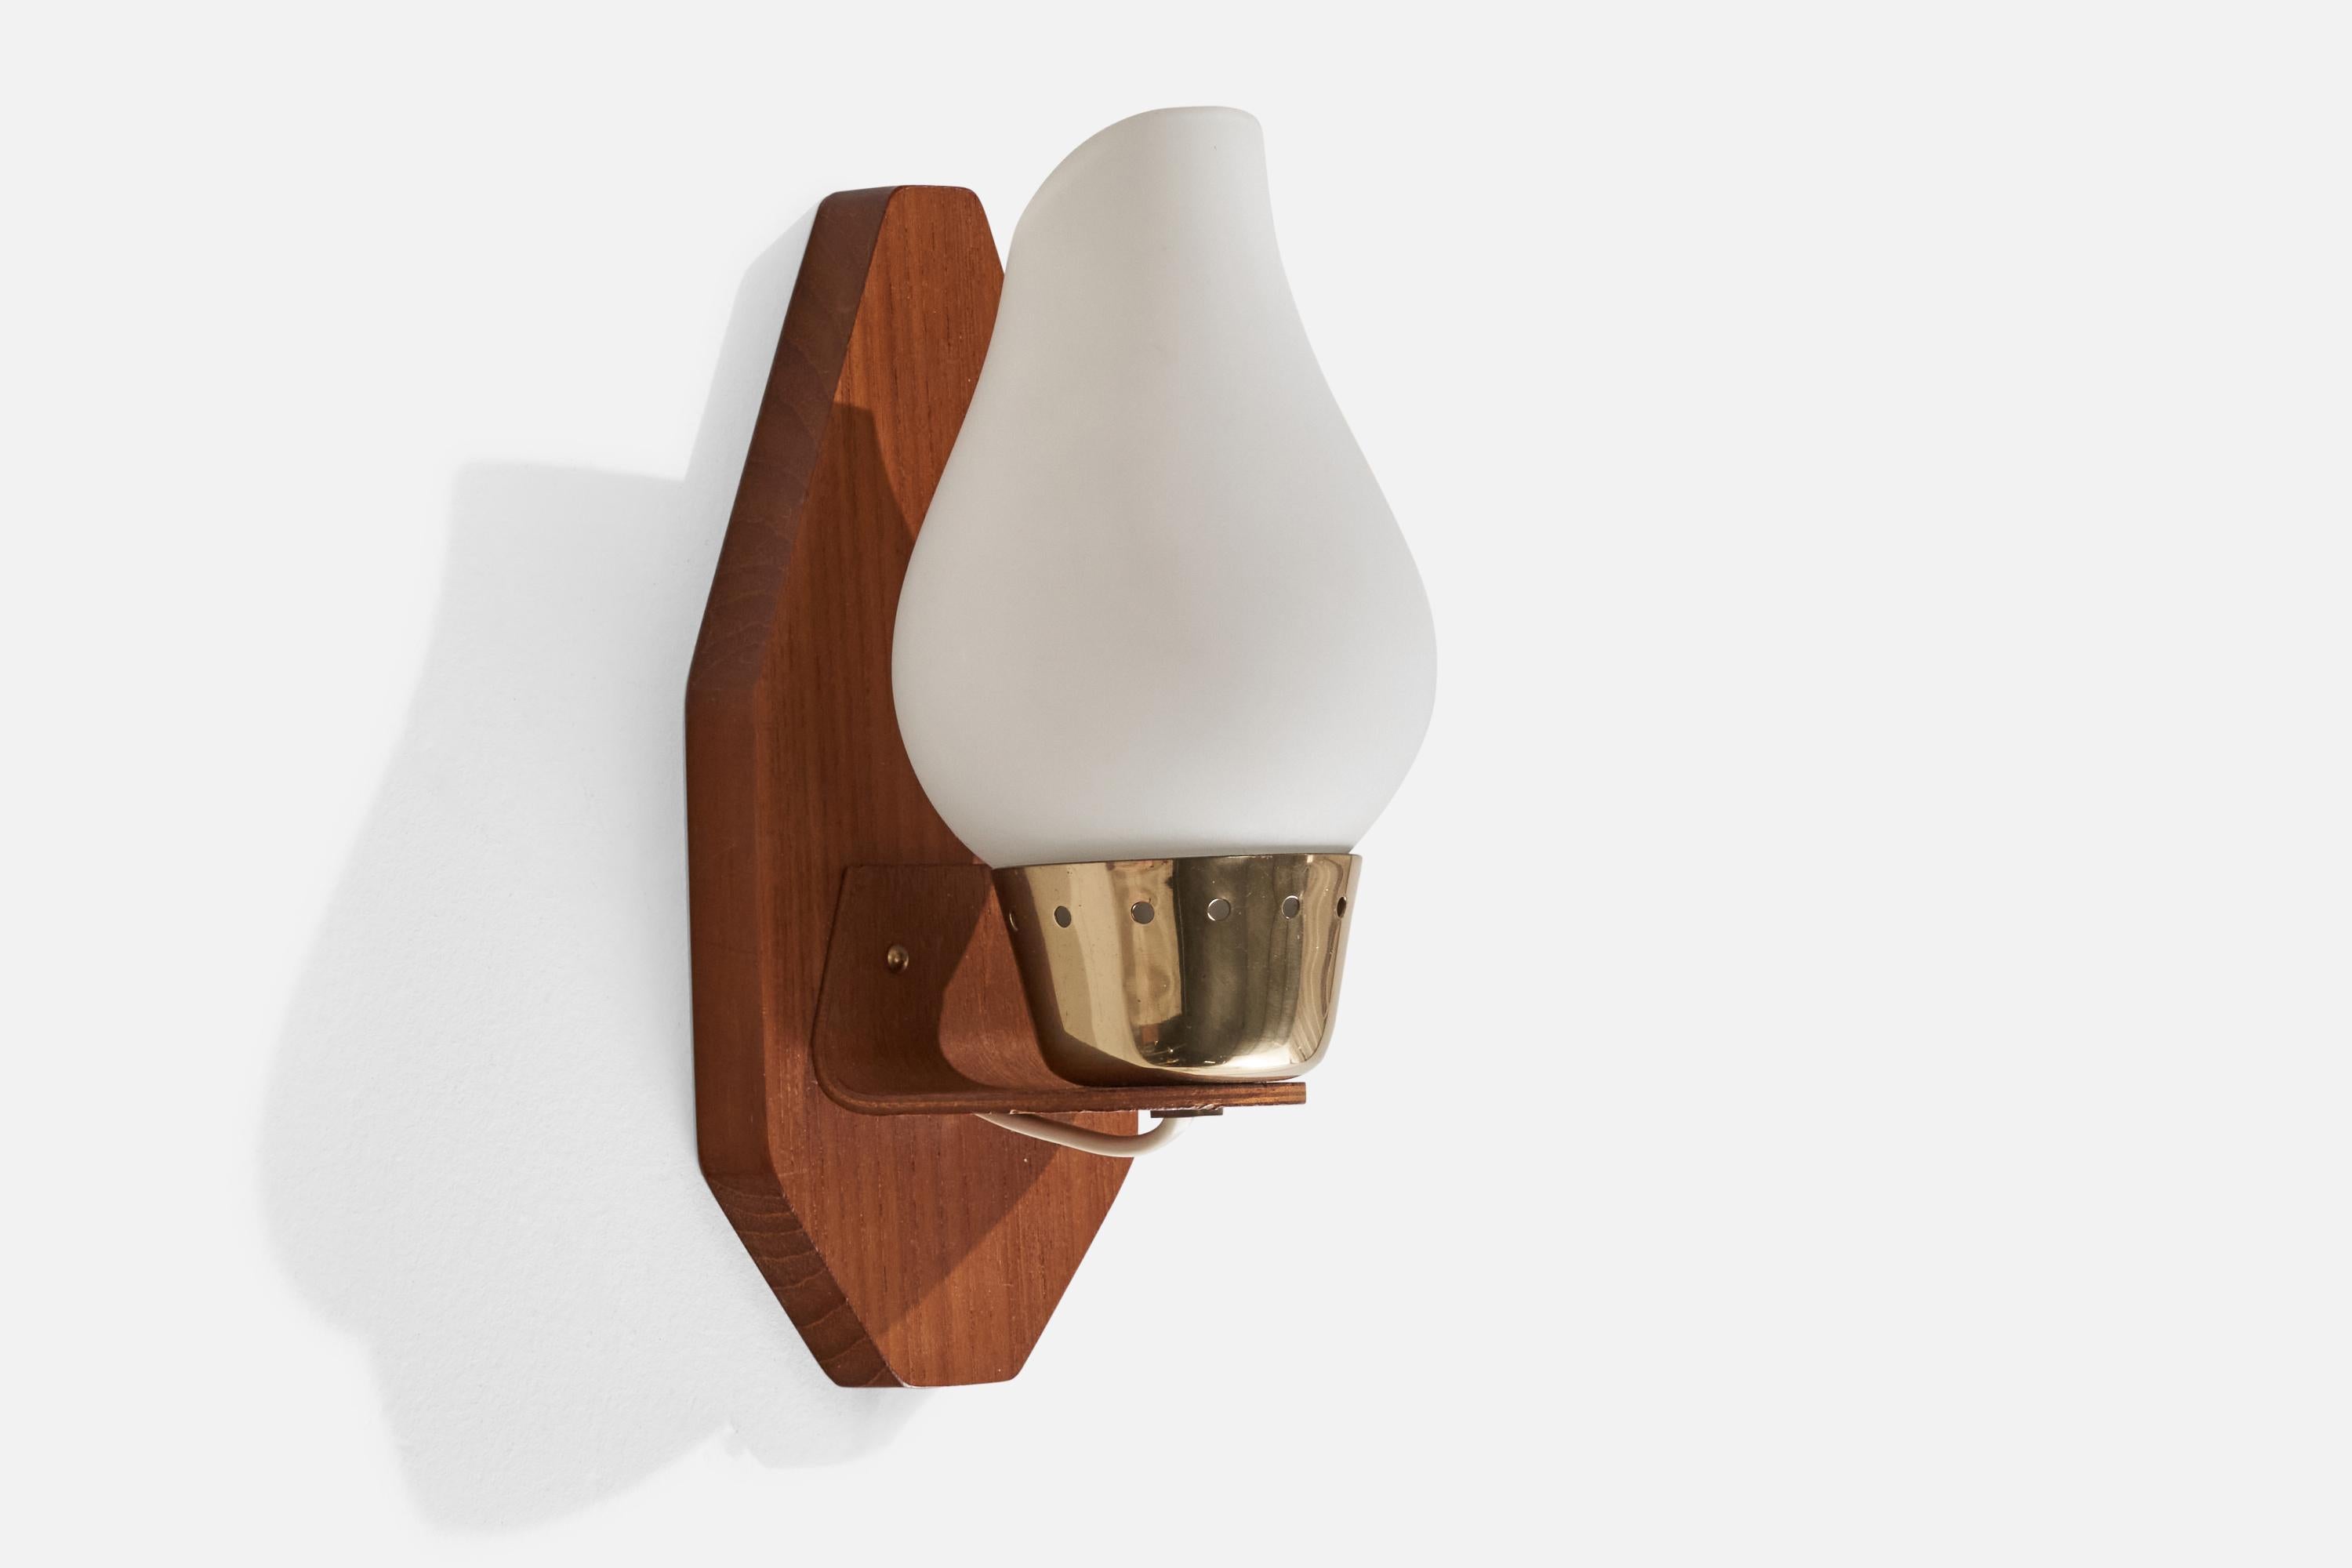 A teak, brass and opaline glass wall light designed and produced in Sweden, c. 1950s.

Overall Dimensions (inches): 8.25” H x 3.64” W x 4.25” D
Back Plate Dimensions (inches): 7.75” H x 3.64” W x 0.80” D
Bulb Specifications: E-14 Bulb
Number of